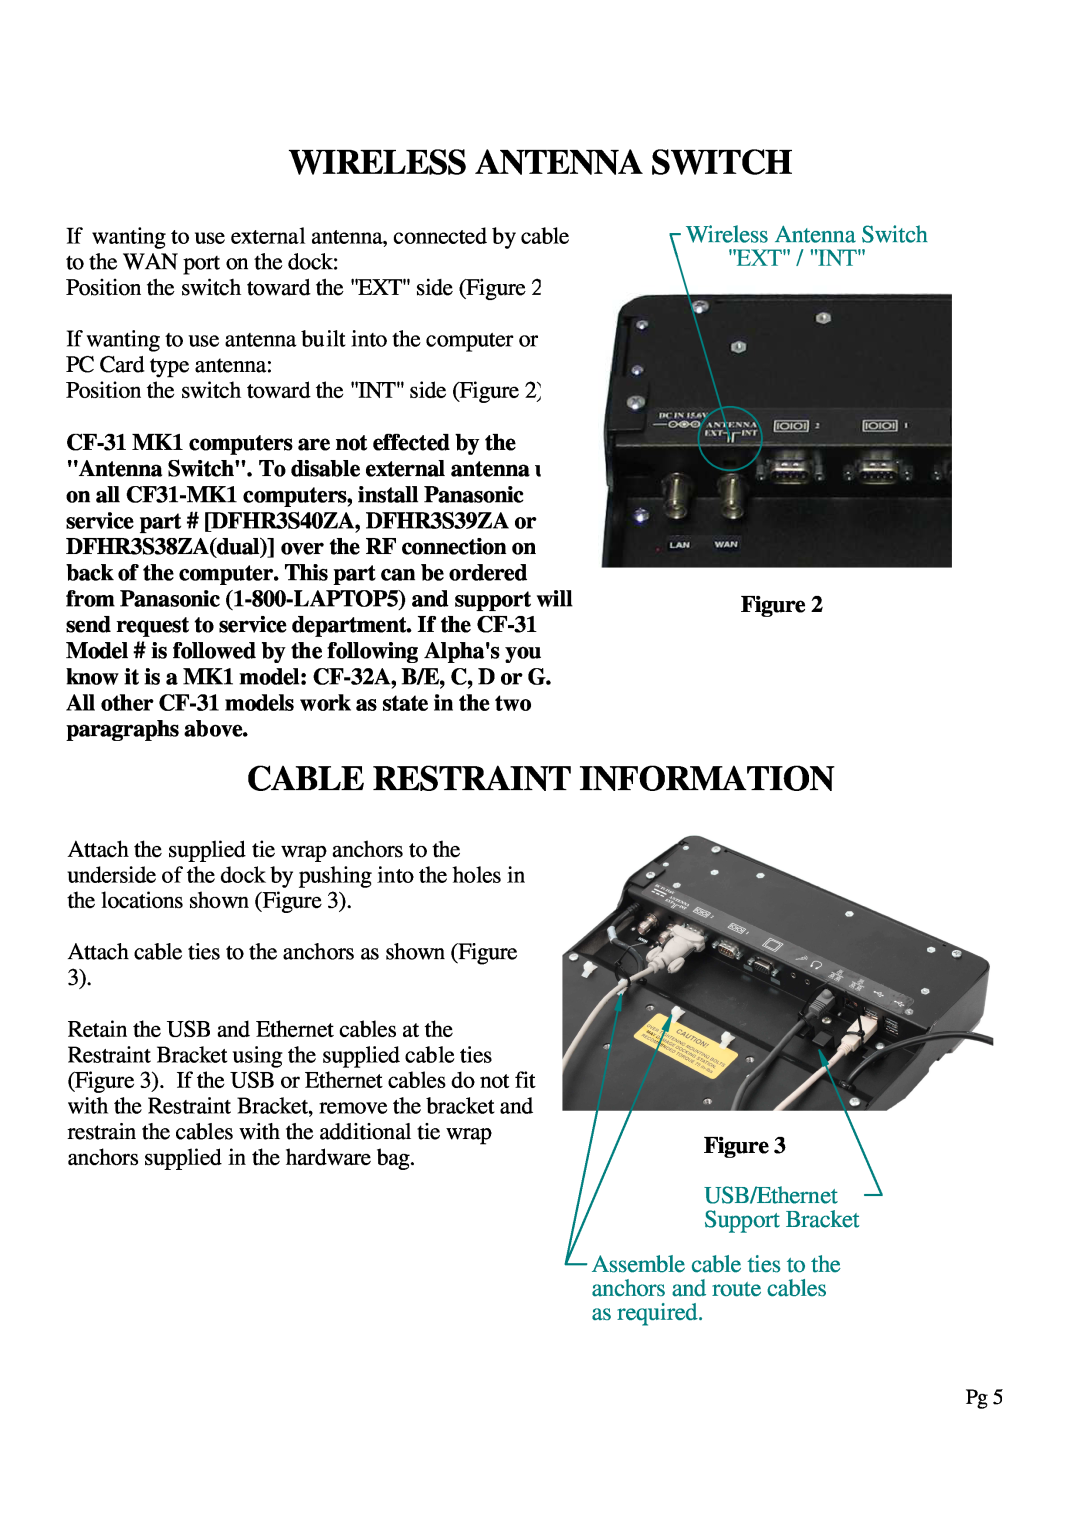 Gamber Johnson 7160-0318-04 Cable Restraint Information, Wireless Antenna Switch EXT / INT, USB/Ethernet, as required 